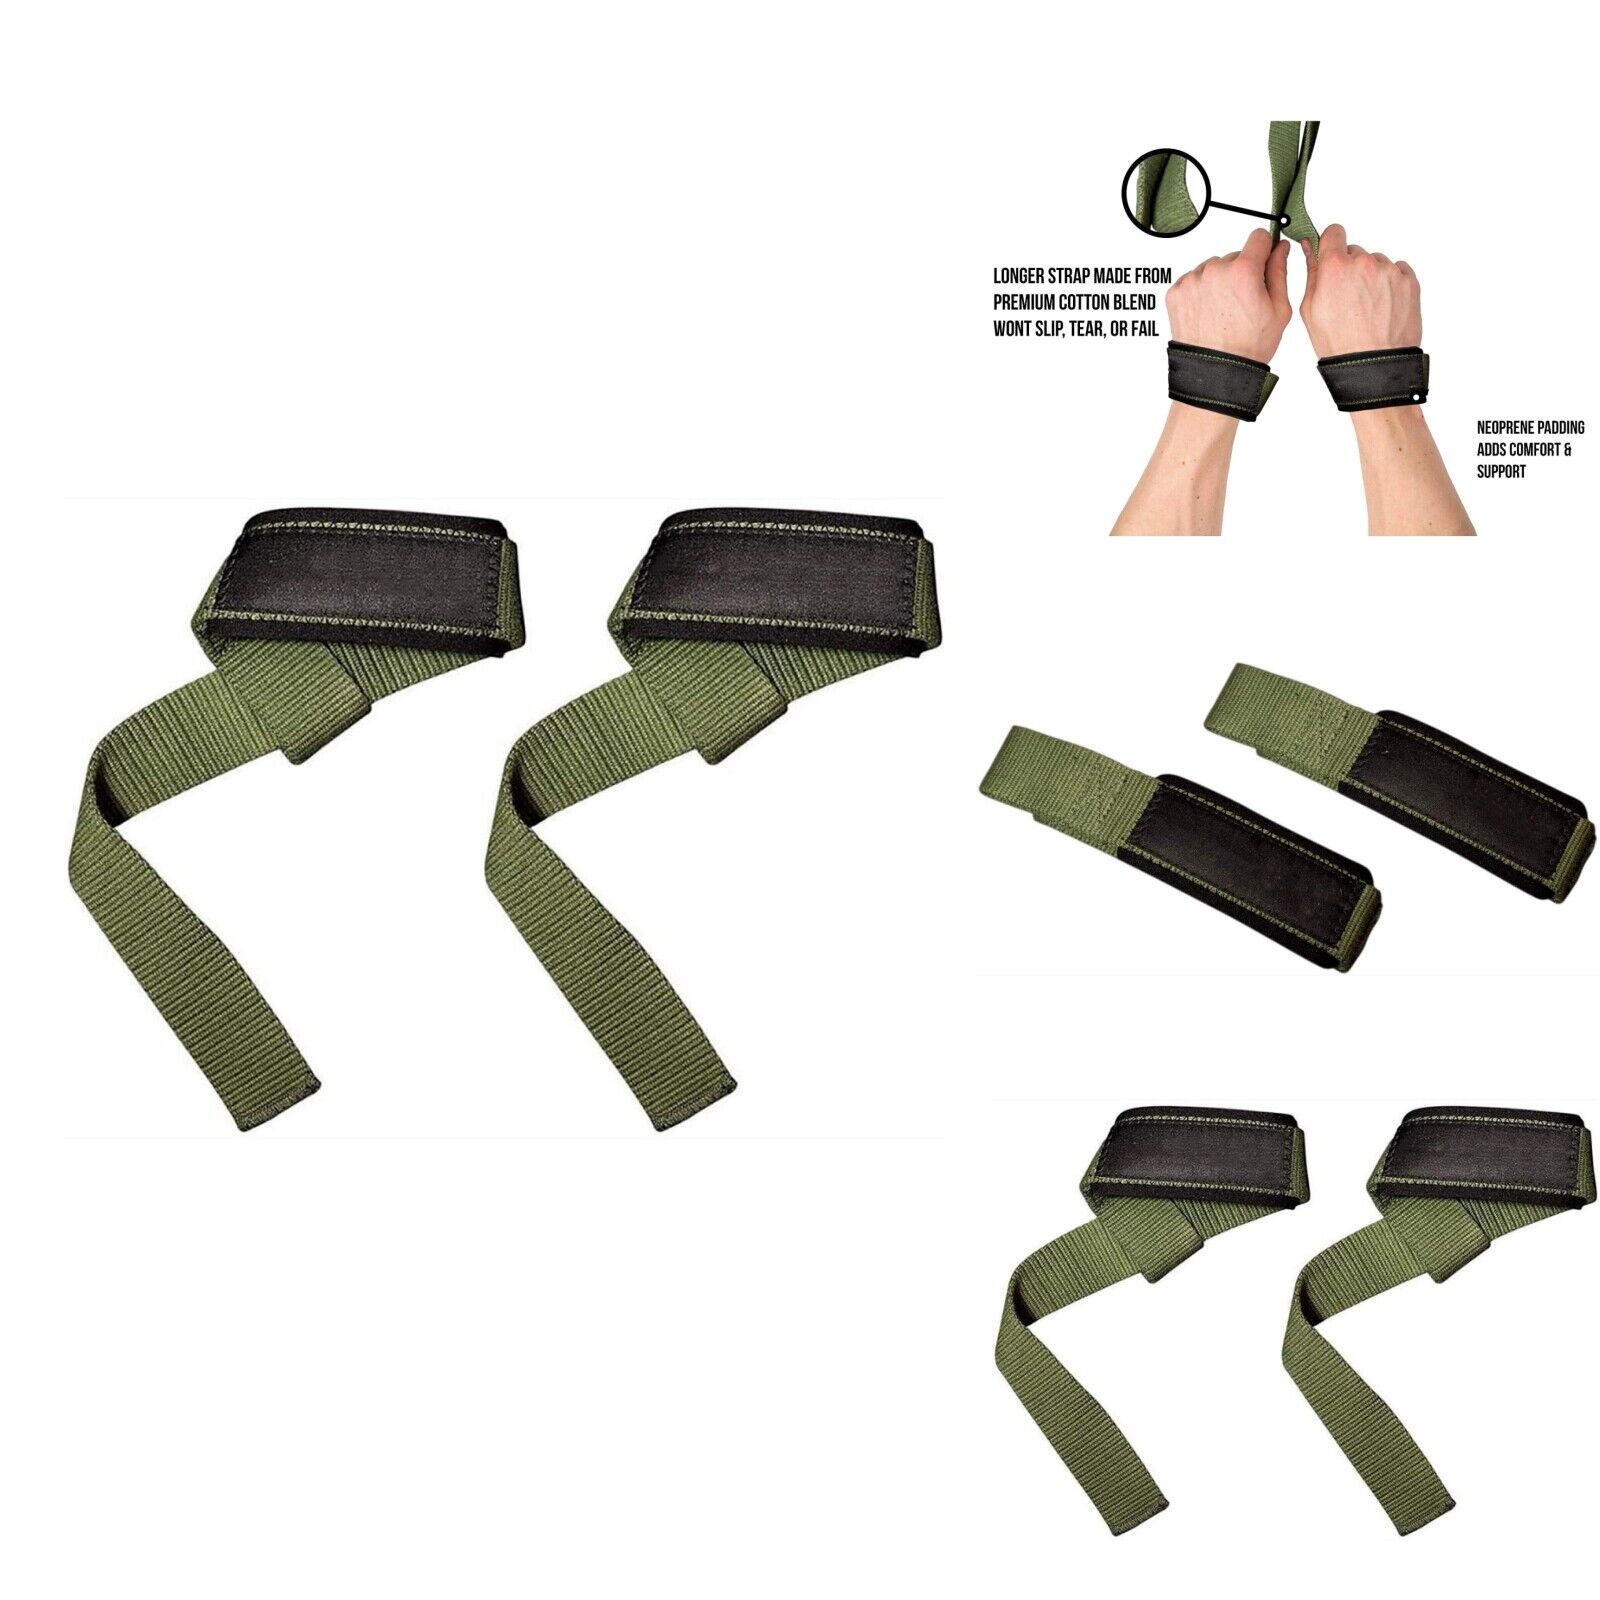 Wrist Straps for Weightlifting, Powerlifting, Strength Training for Adults Decorus Does not apply